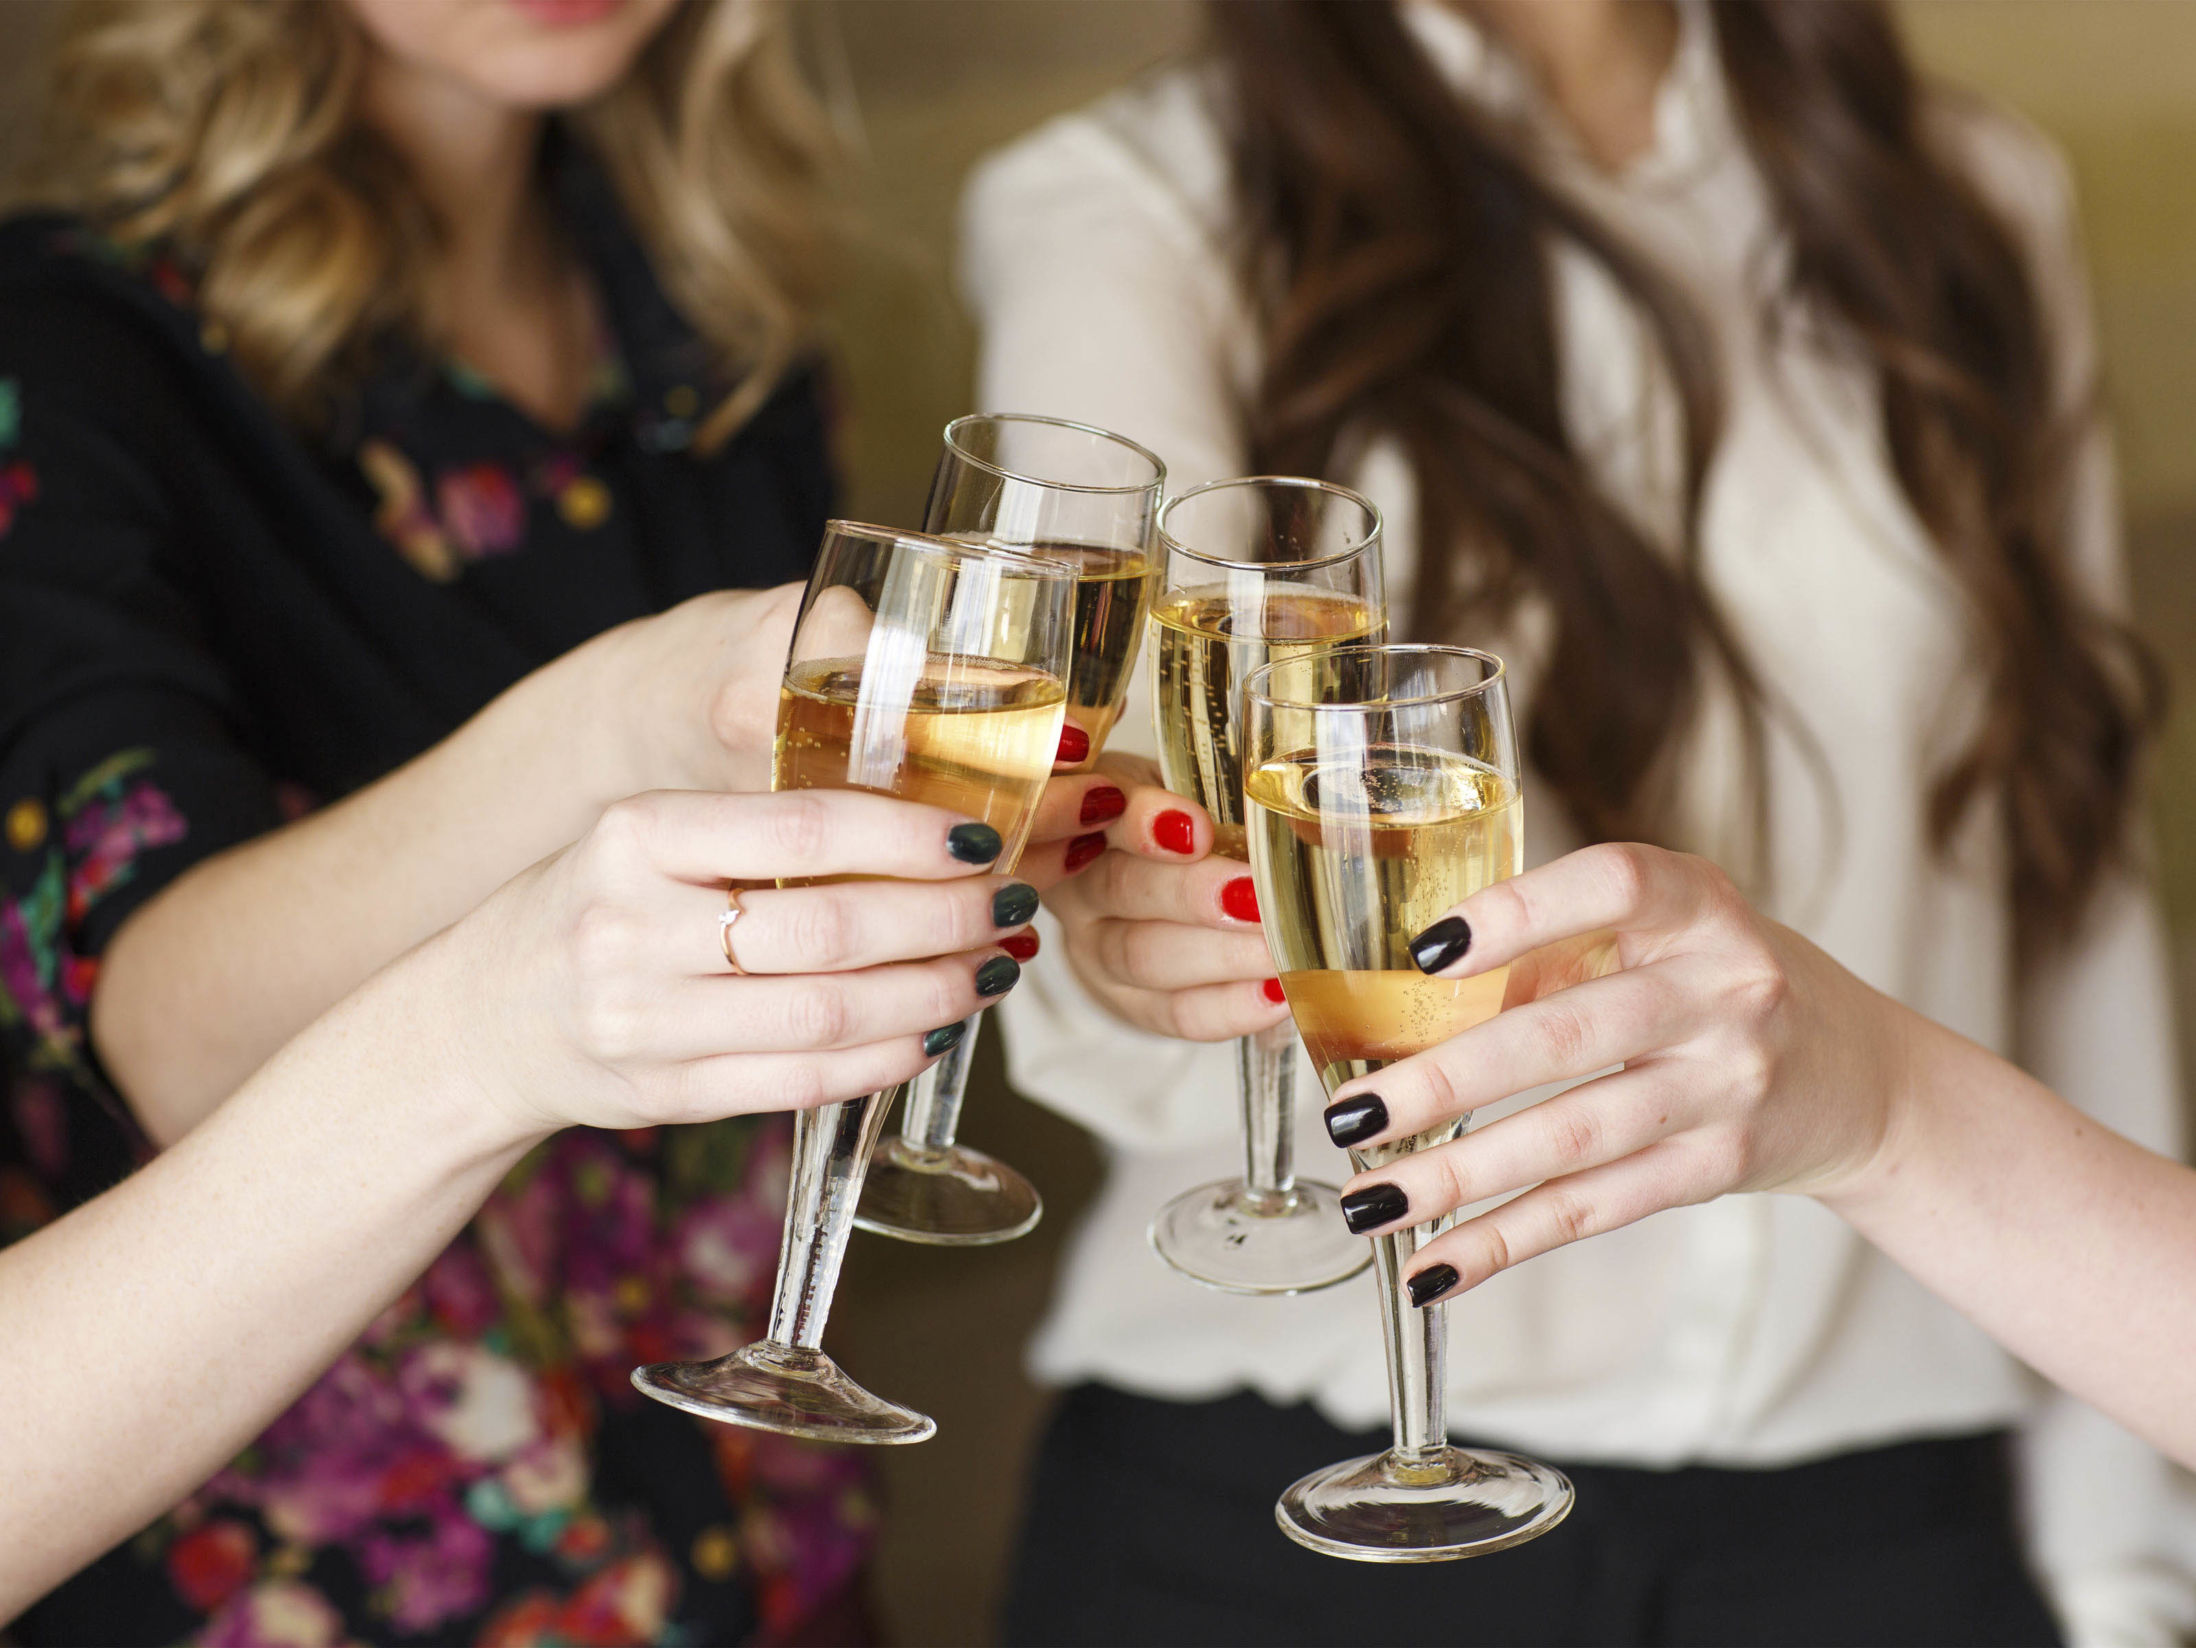 Fun Ideas for Ladies Night at Home - Mobile Prosecco Tasting